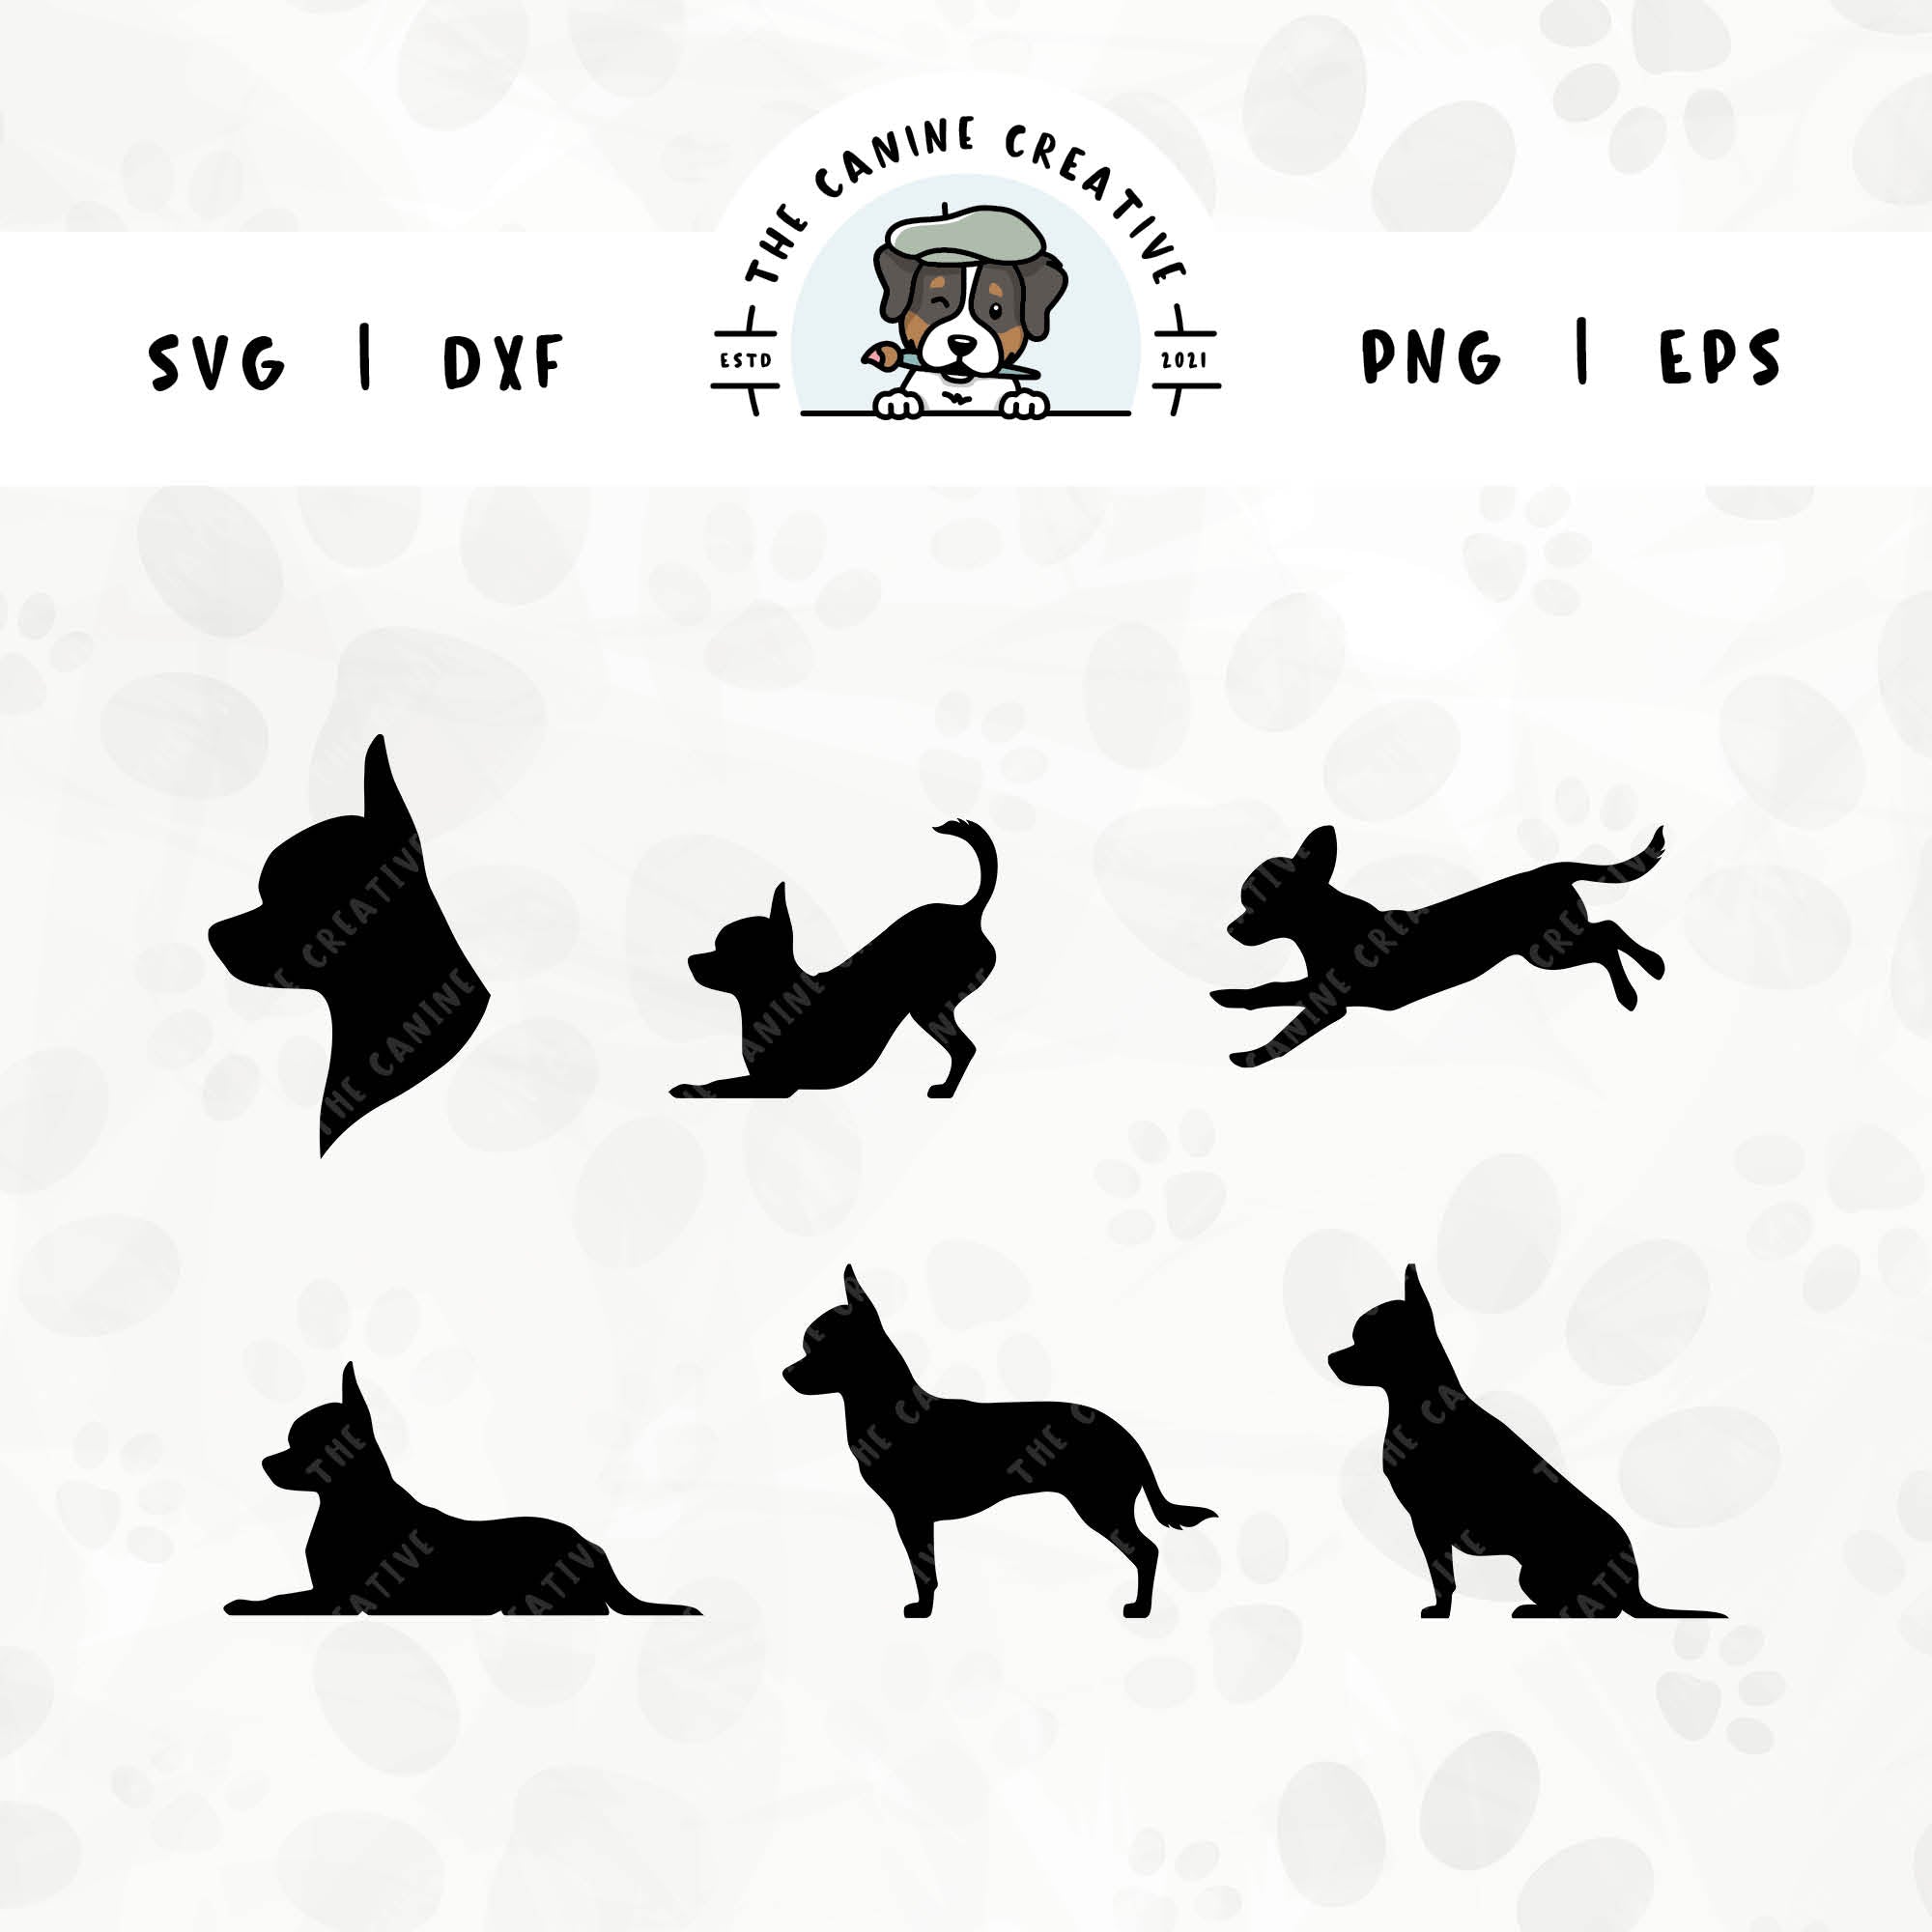 This 6-pack Smooth Coat Chihuahua silhouette bundle (set 1) features a dog's head in profile, along with various poses including running, laying down, playing, standing, and sitting. File formats include: SVG, DXF, PNG, and EPS.